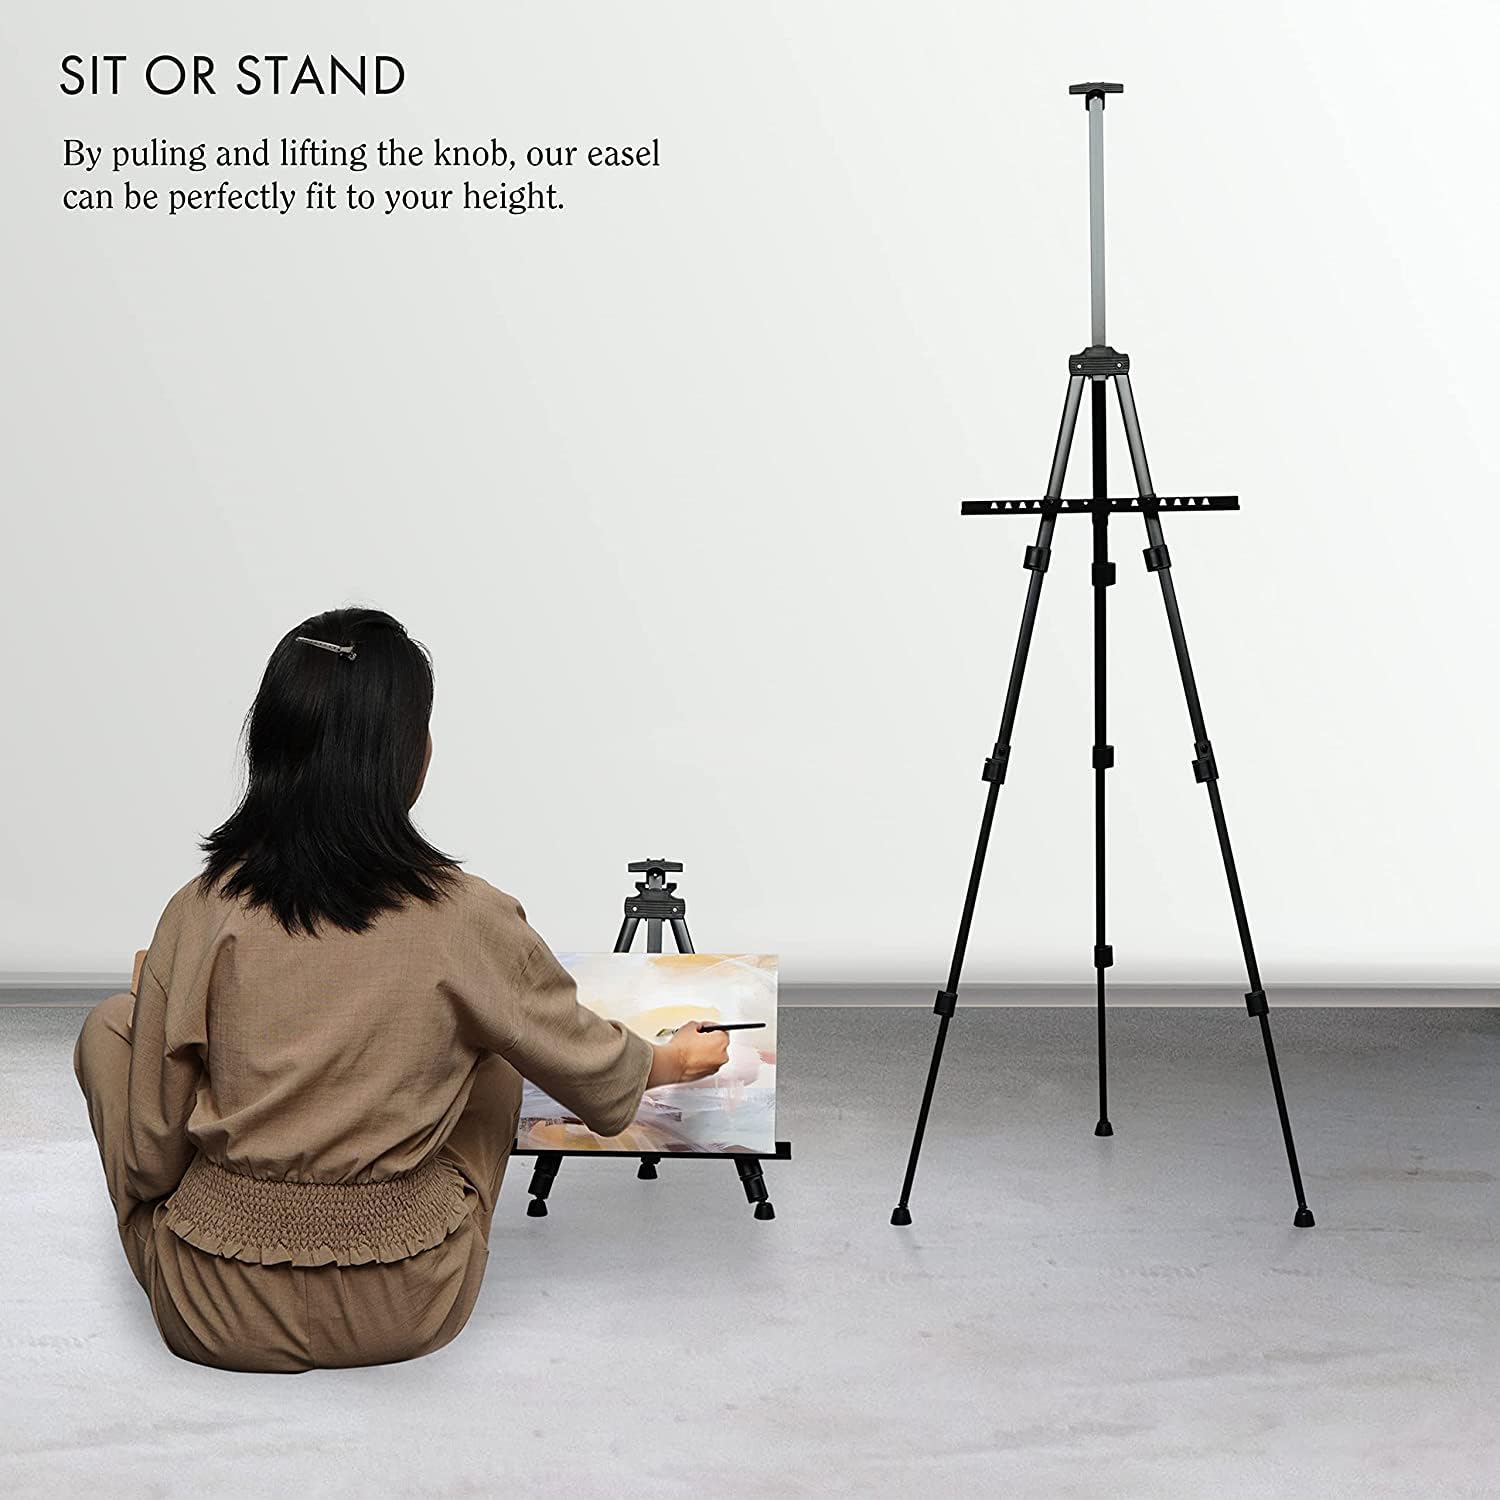 ARTIFY Art Supplies ARTIFY 66 Inches Double Tier Easel Stand Adjustable Height from 22-66 Tripod for Painting and Display with A Carrying Bag Pack Bla